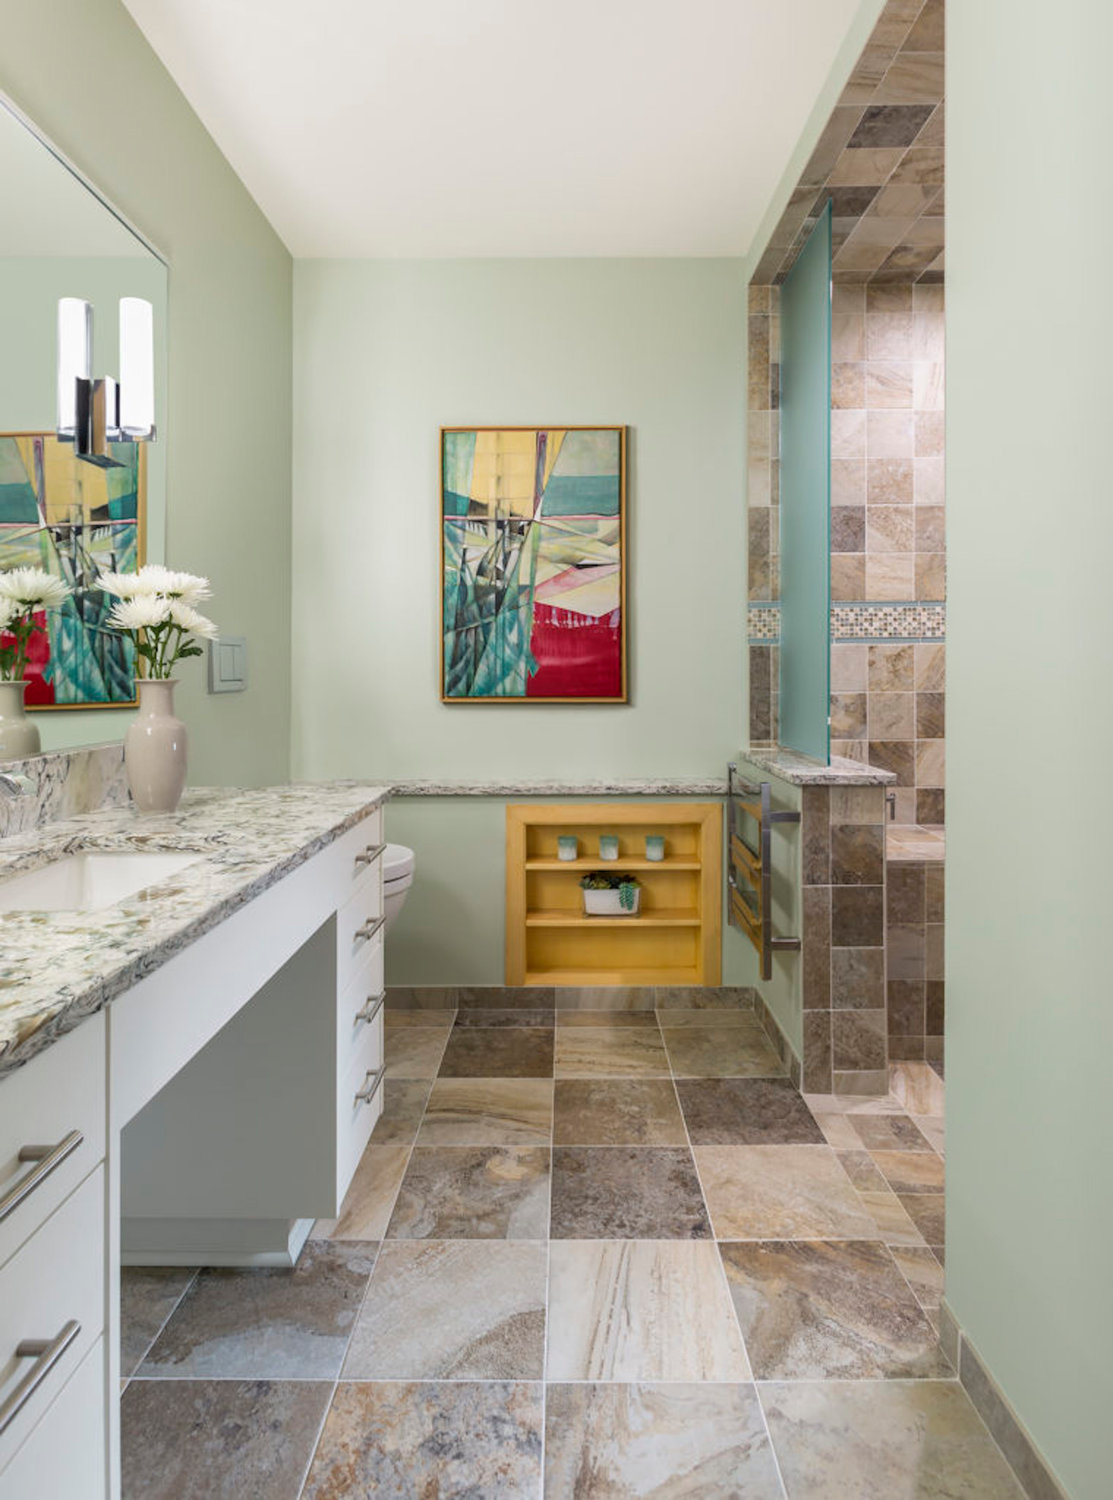 This bathroom by Sylvestre Remodeling & Design features a shower without a curb as it aids in mobility. Dangerous throw rugs have been removed. (Photos by Andrea Rugg Photography)